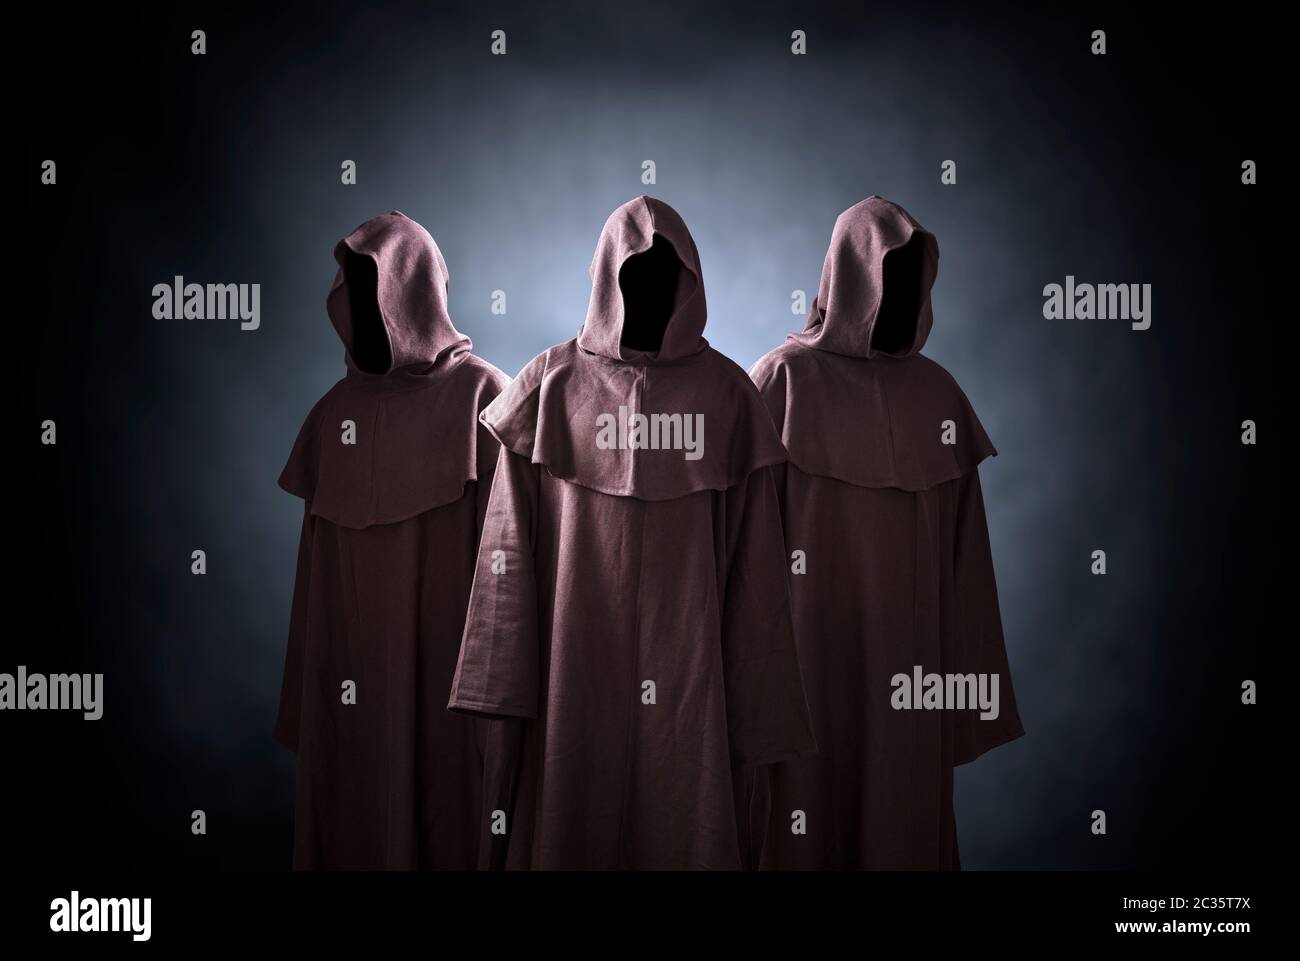 Group of three scary figures in hooded cloaks Stock Photo